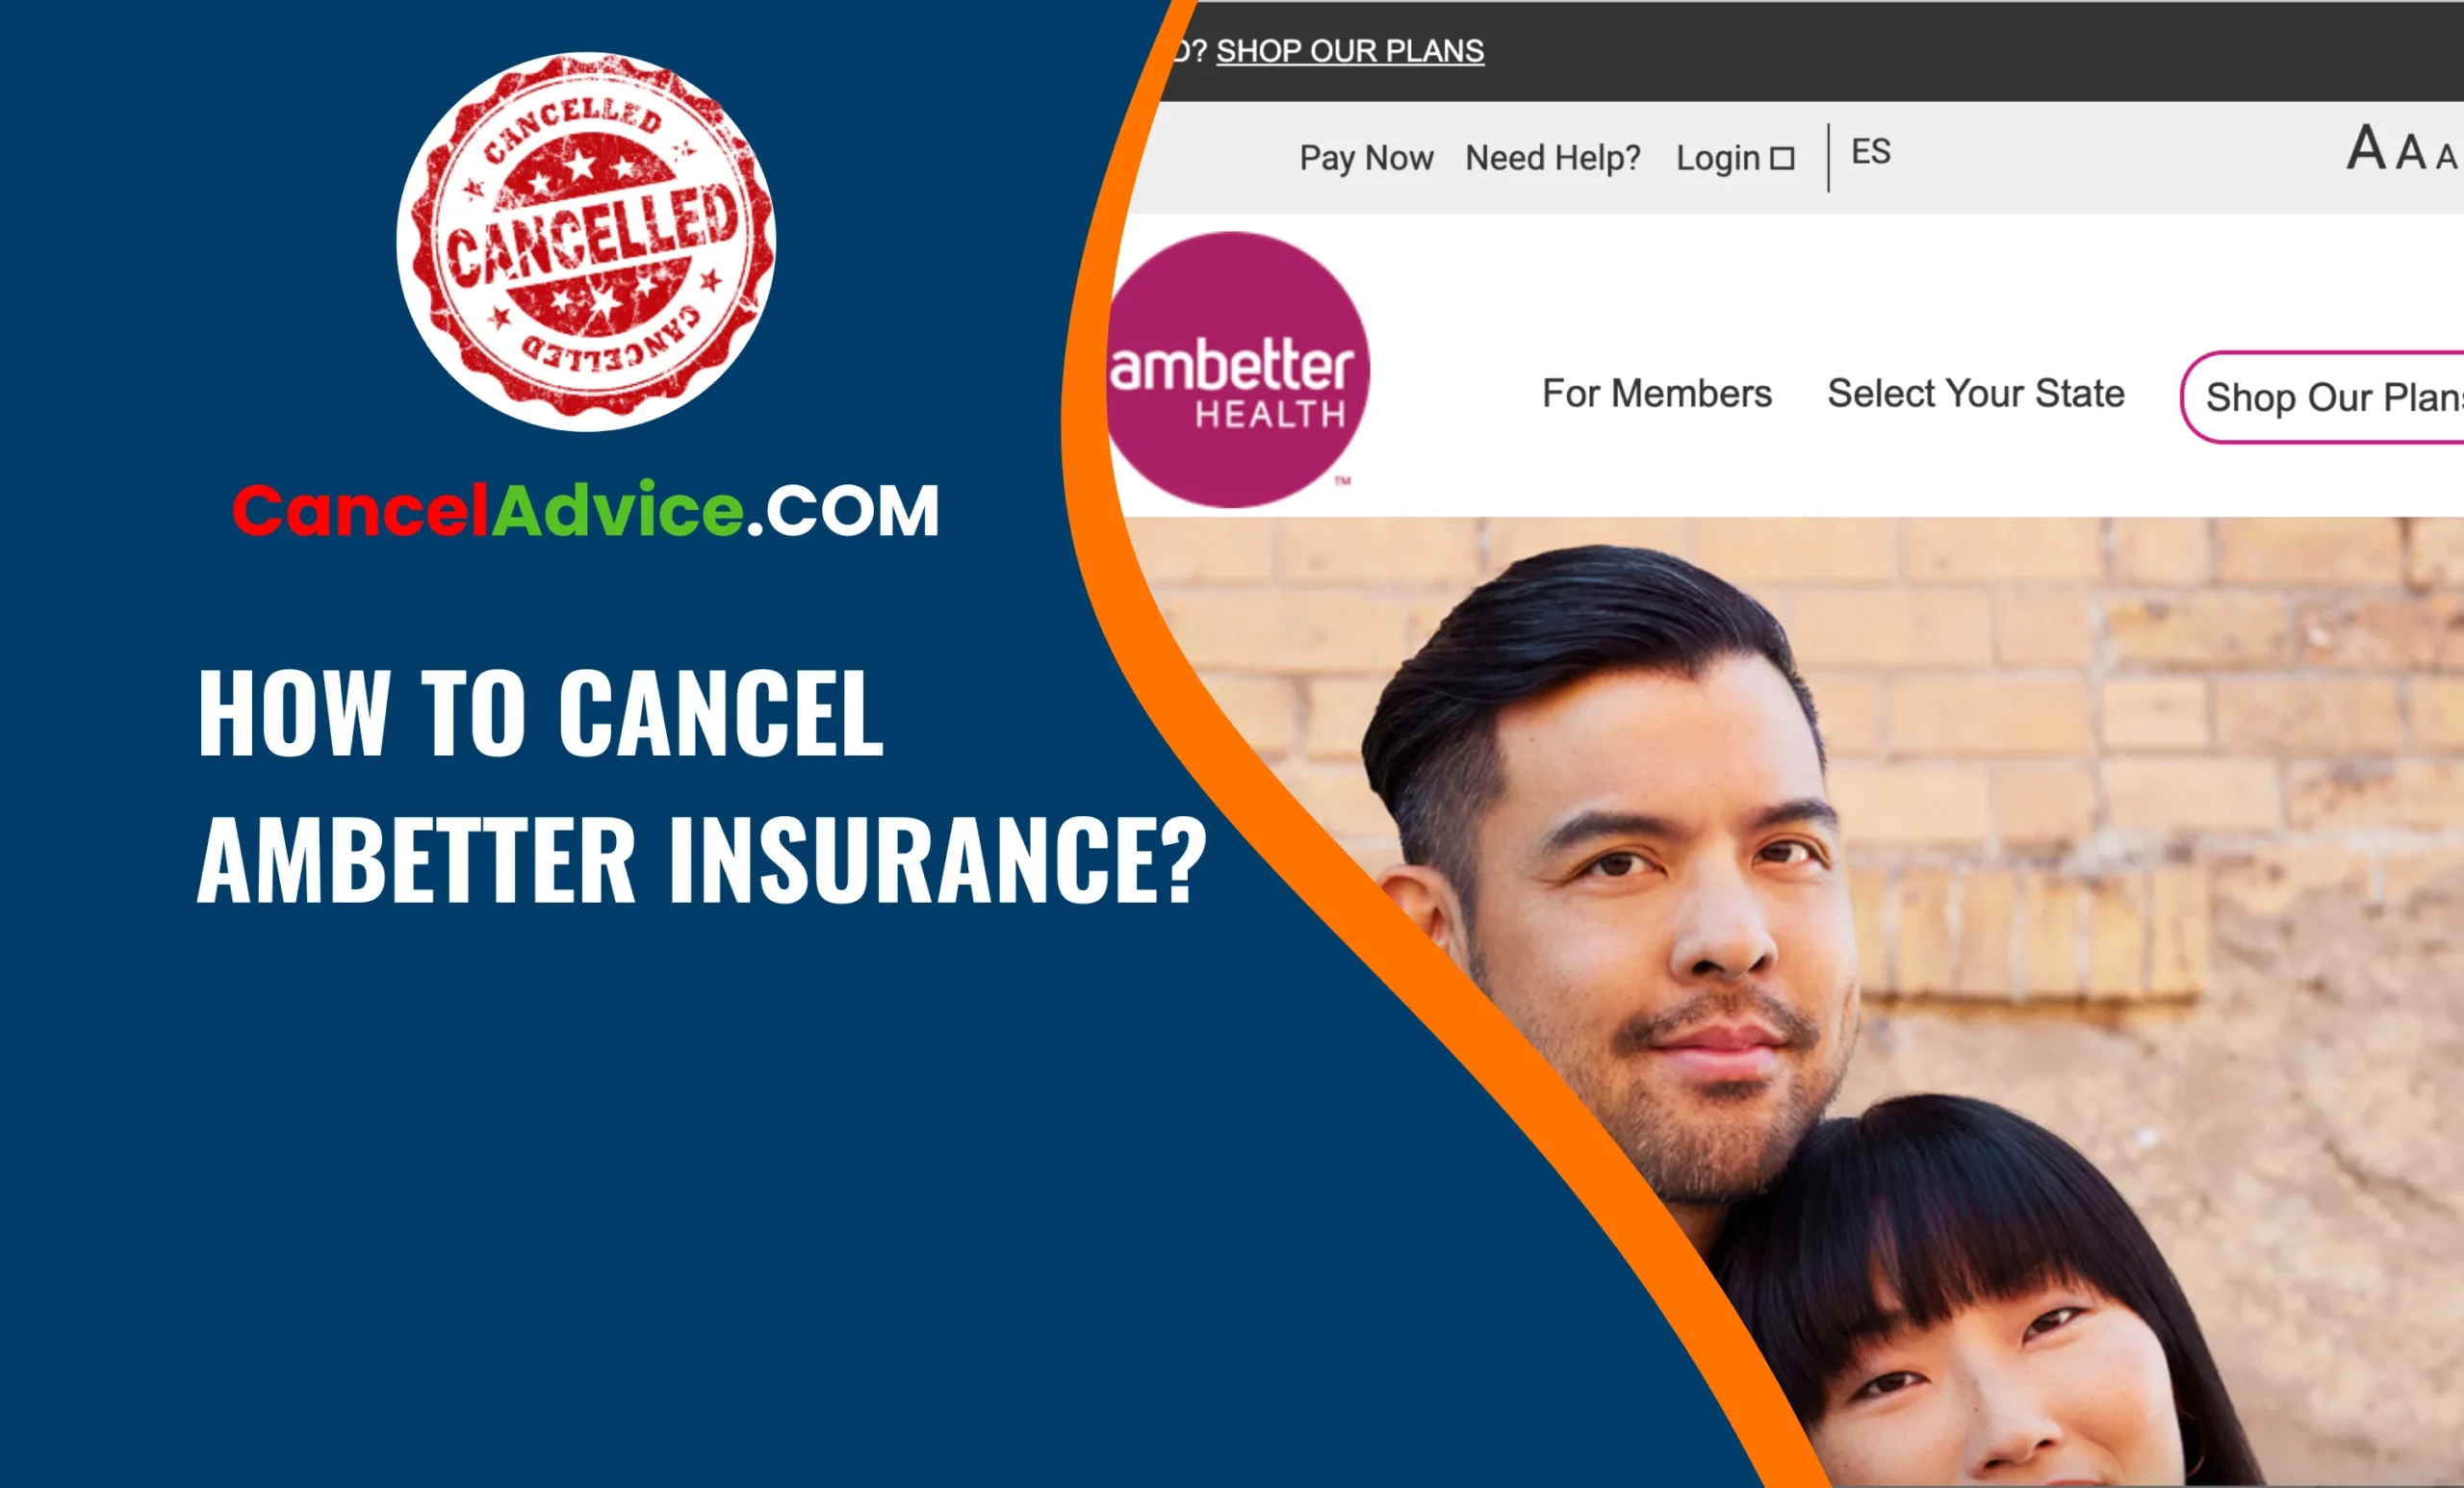 How to Cancel Ambetter Insurance